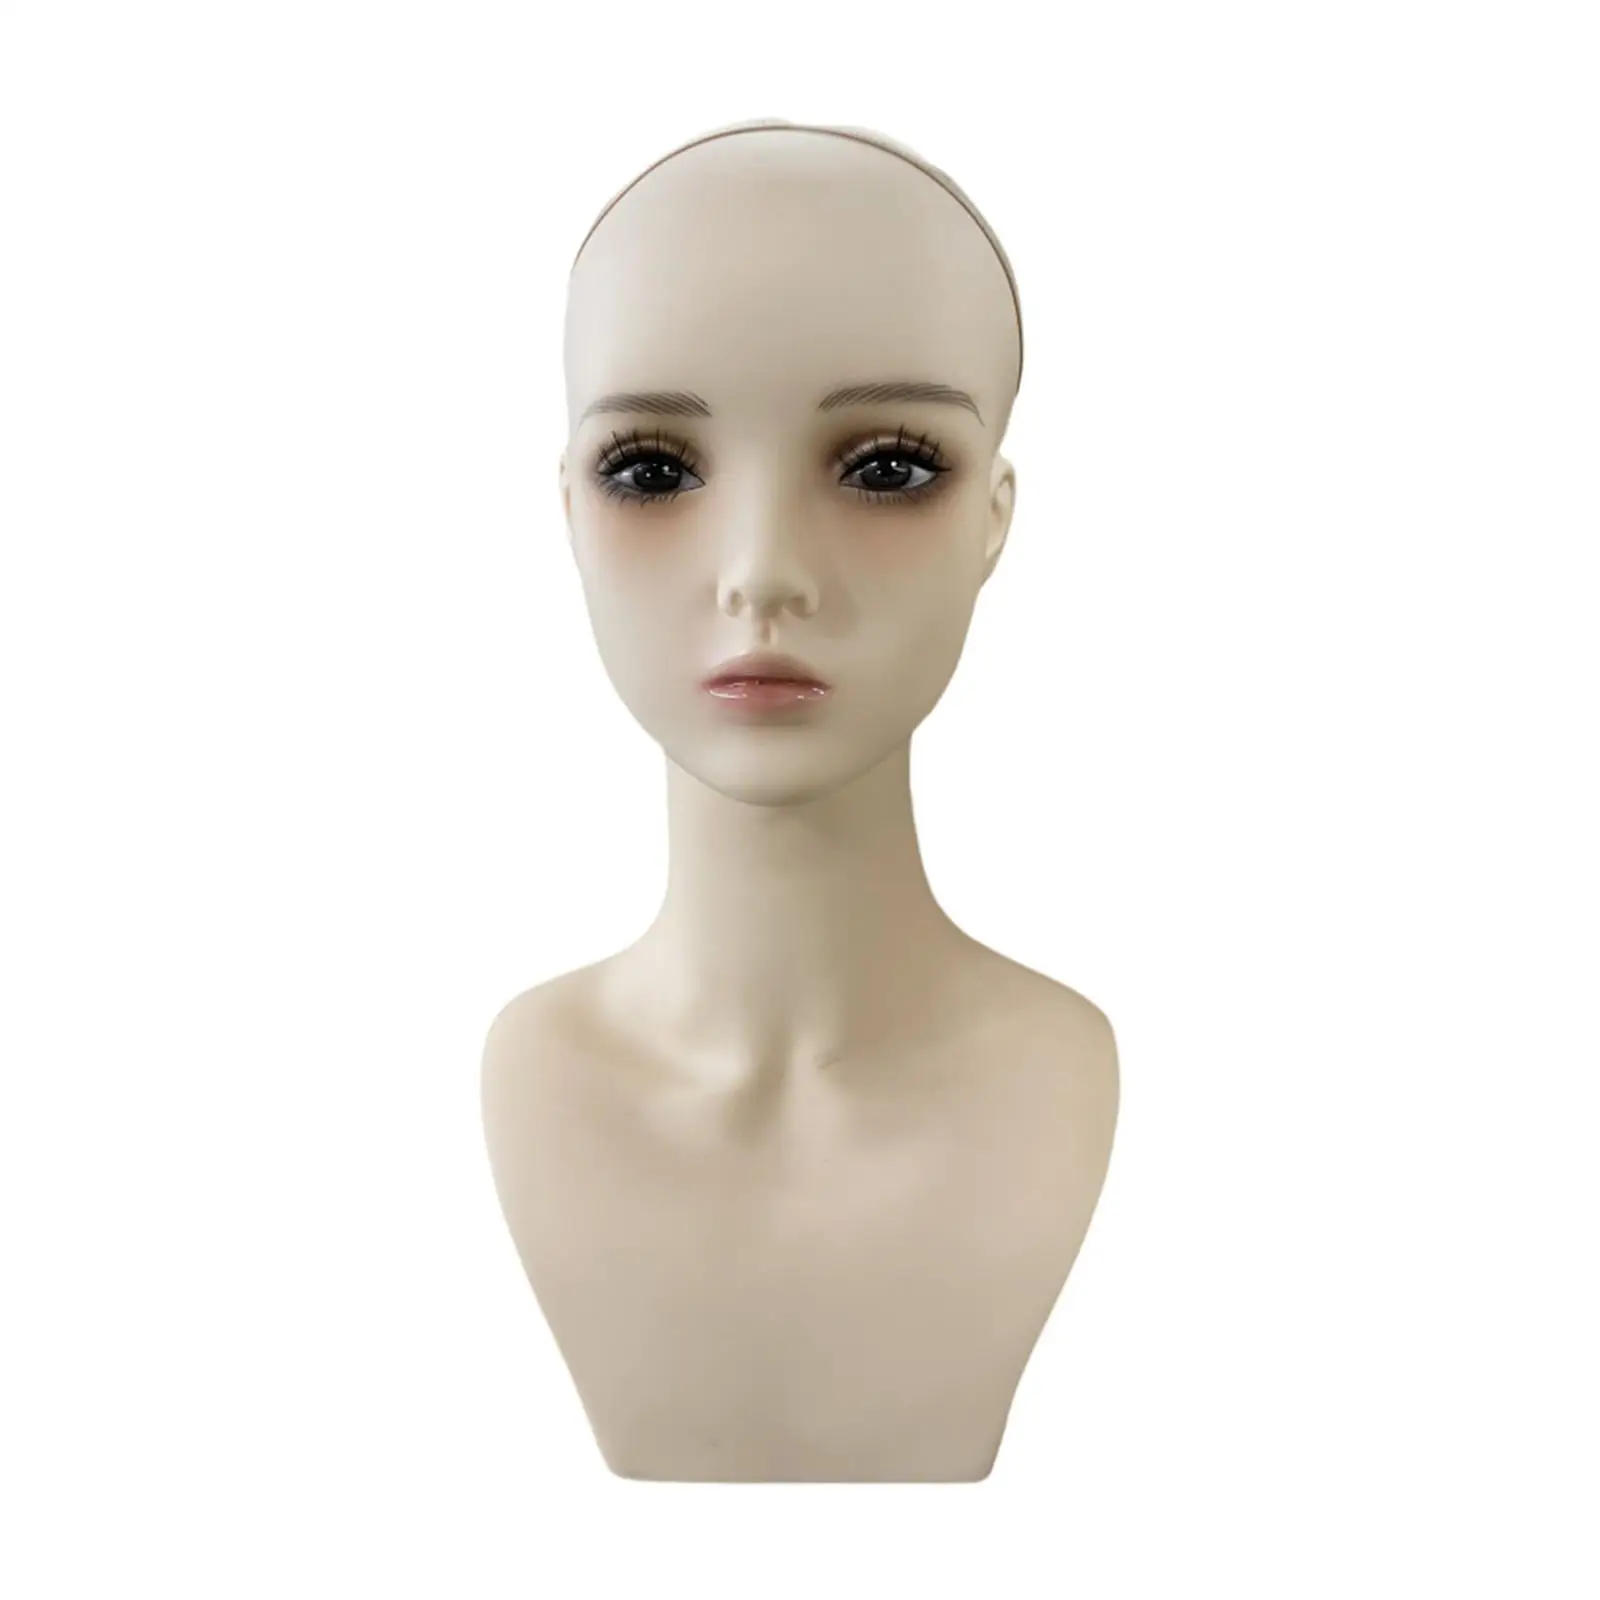 Female Wig Head Mannequin with Makeup Multifunctional Manikin for Jewelry Hats Necklace Glasses Wigs Displaying Making Styling